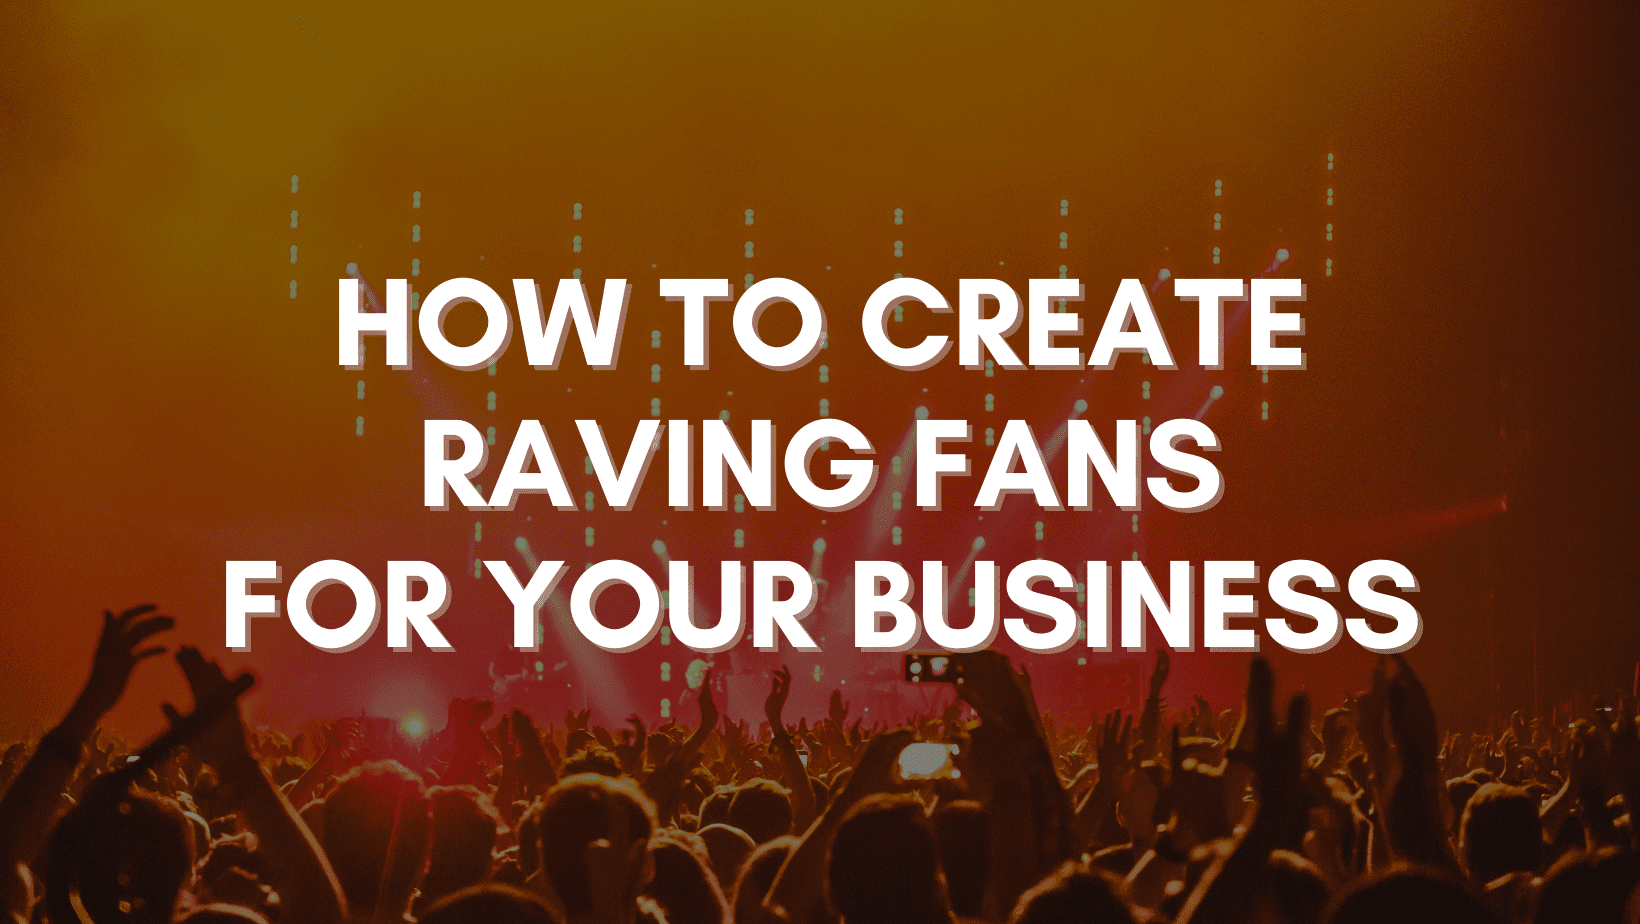 Concert audience with raised hands against a brightly lit stage with text overlay reading "How to Create RAVING Fans for Your Business.